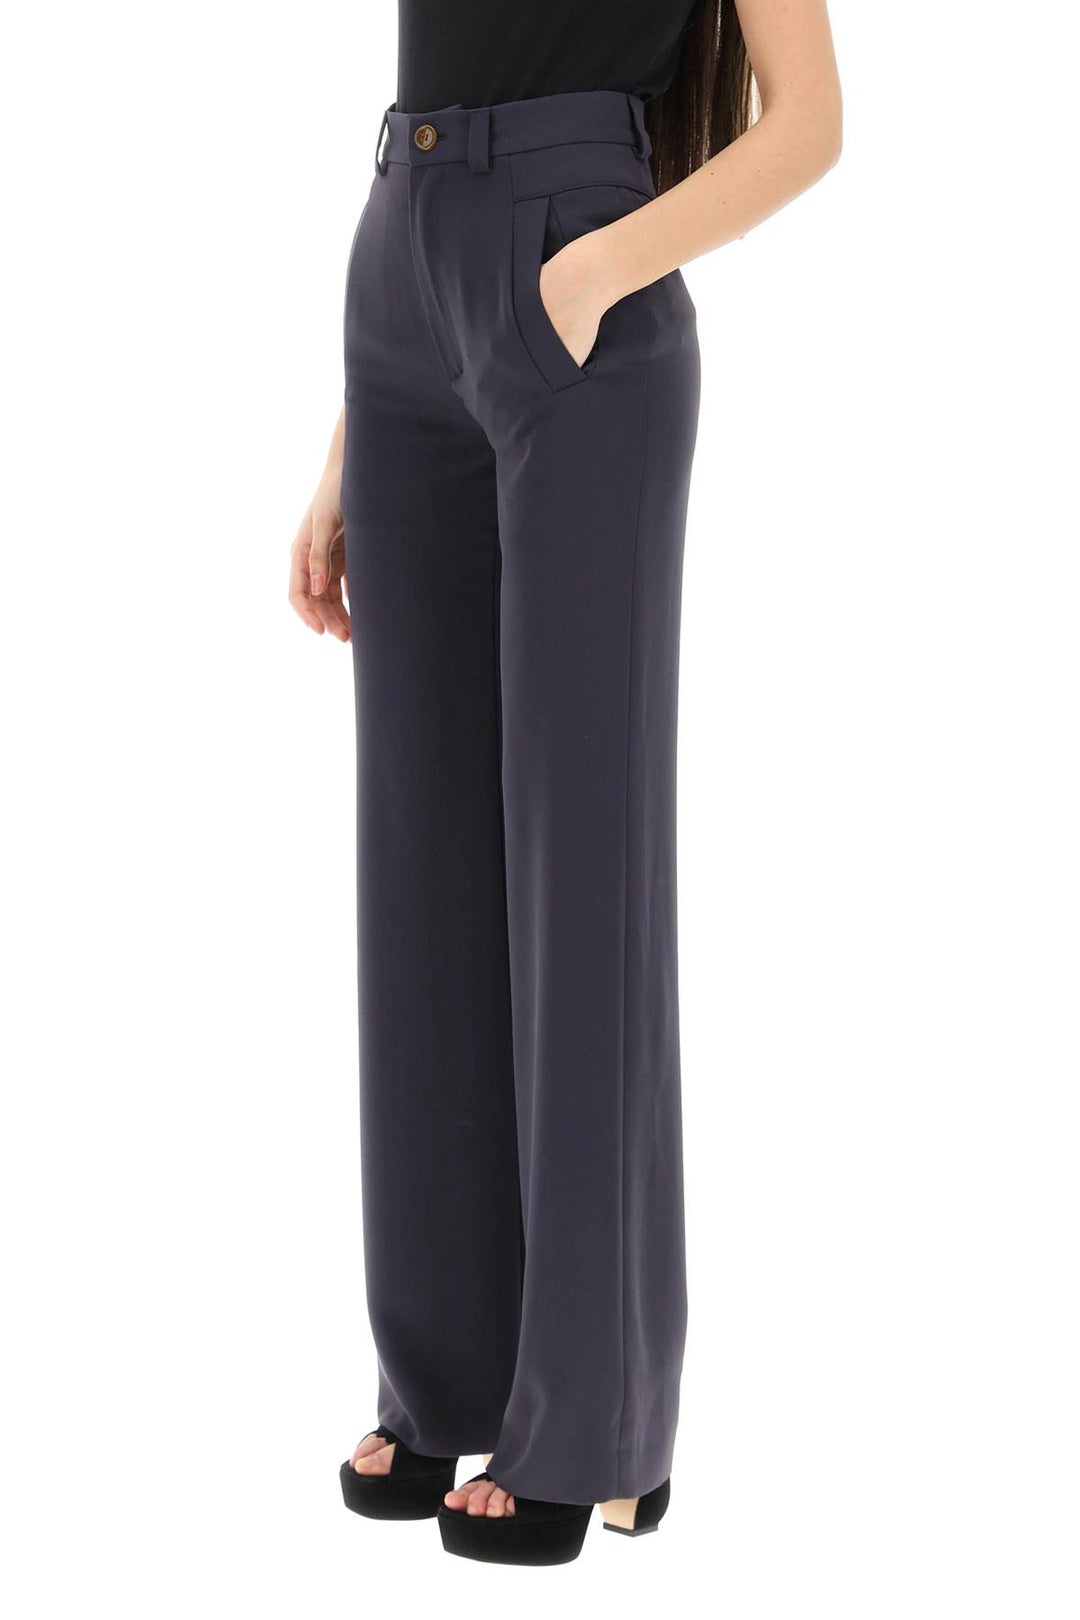 Vivienne westwood 'ray' trousers in recycled cady-3